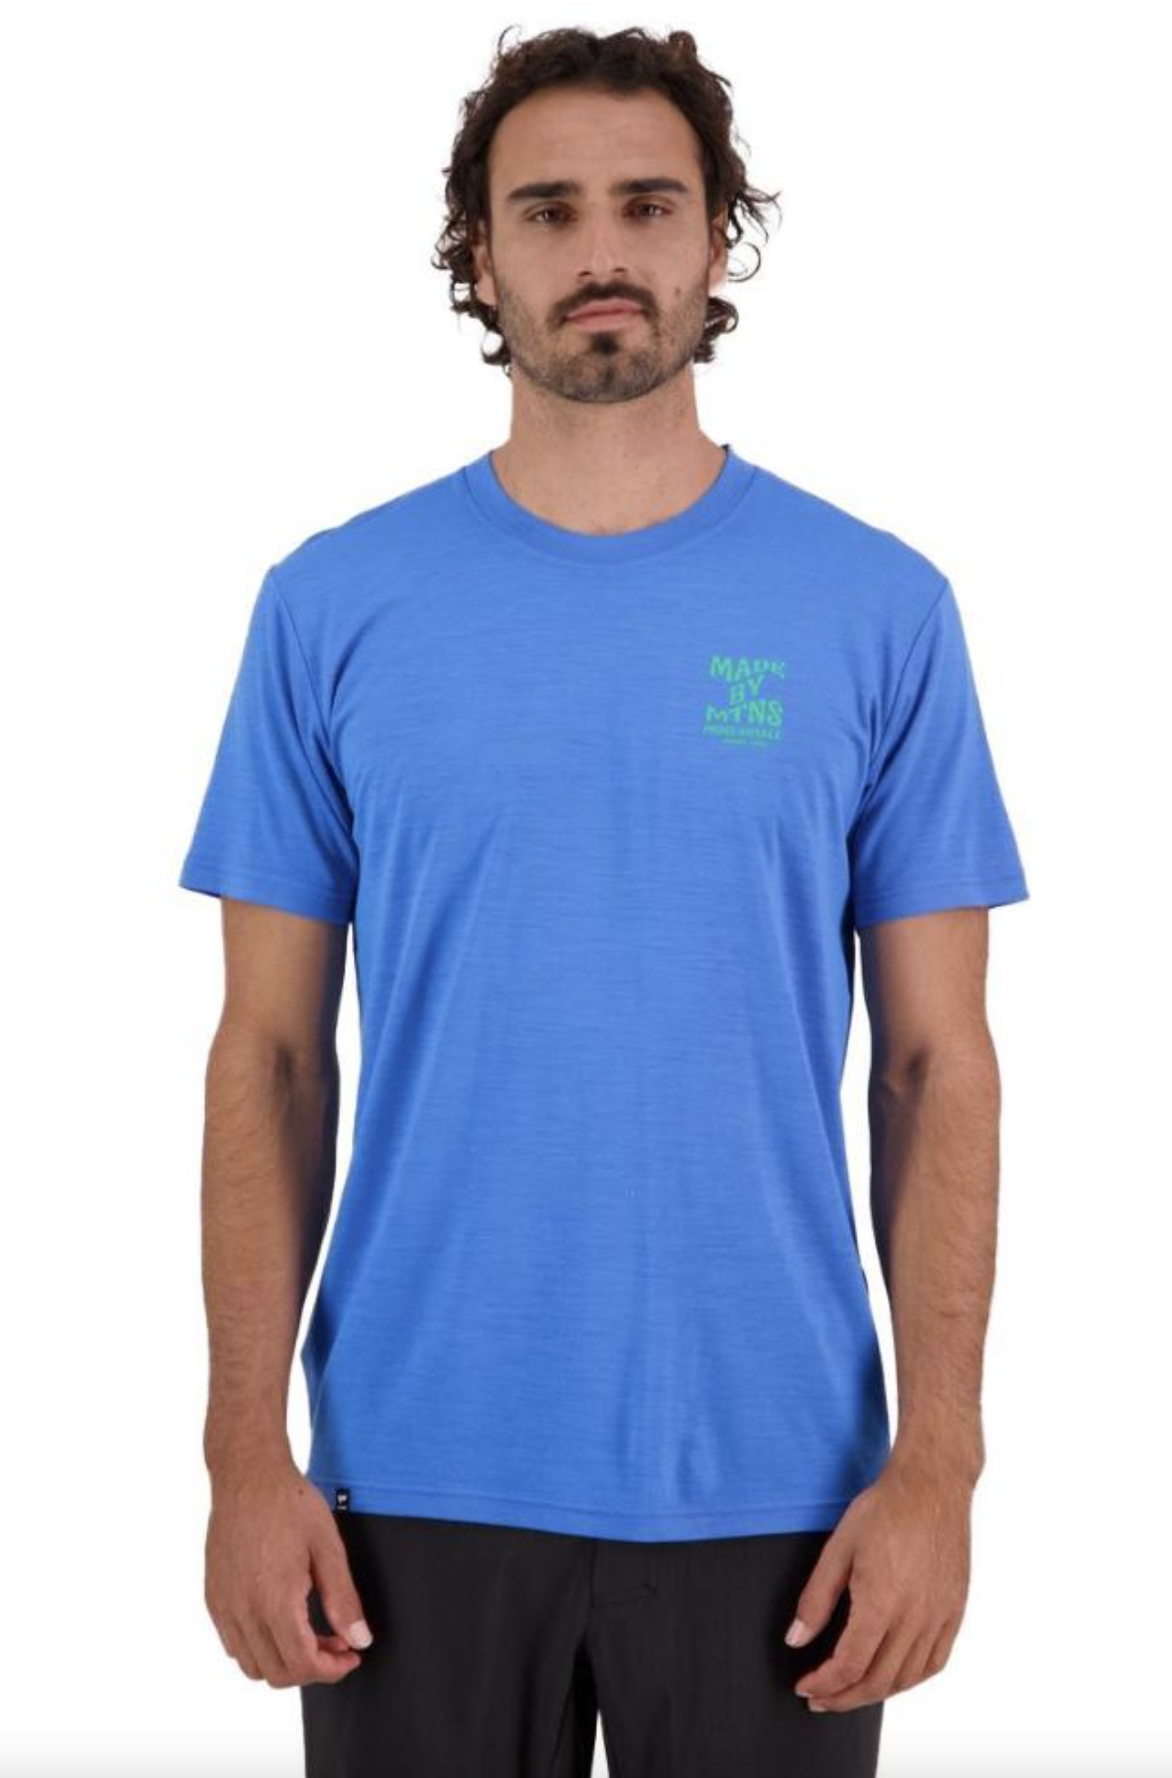 Mons Royale Icon Merino Air-Con T-Shirt - 2nd Ave Sports